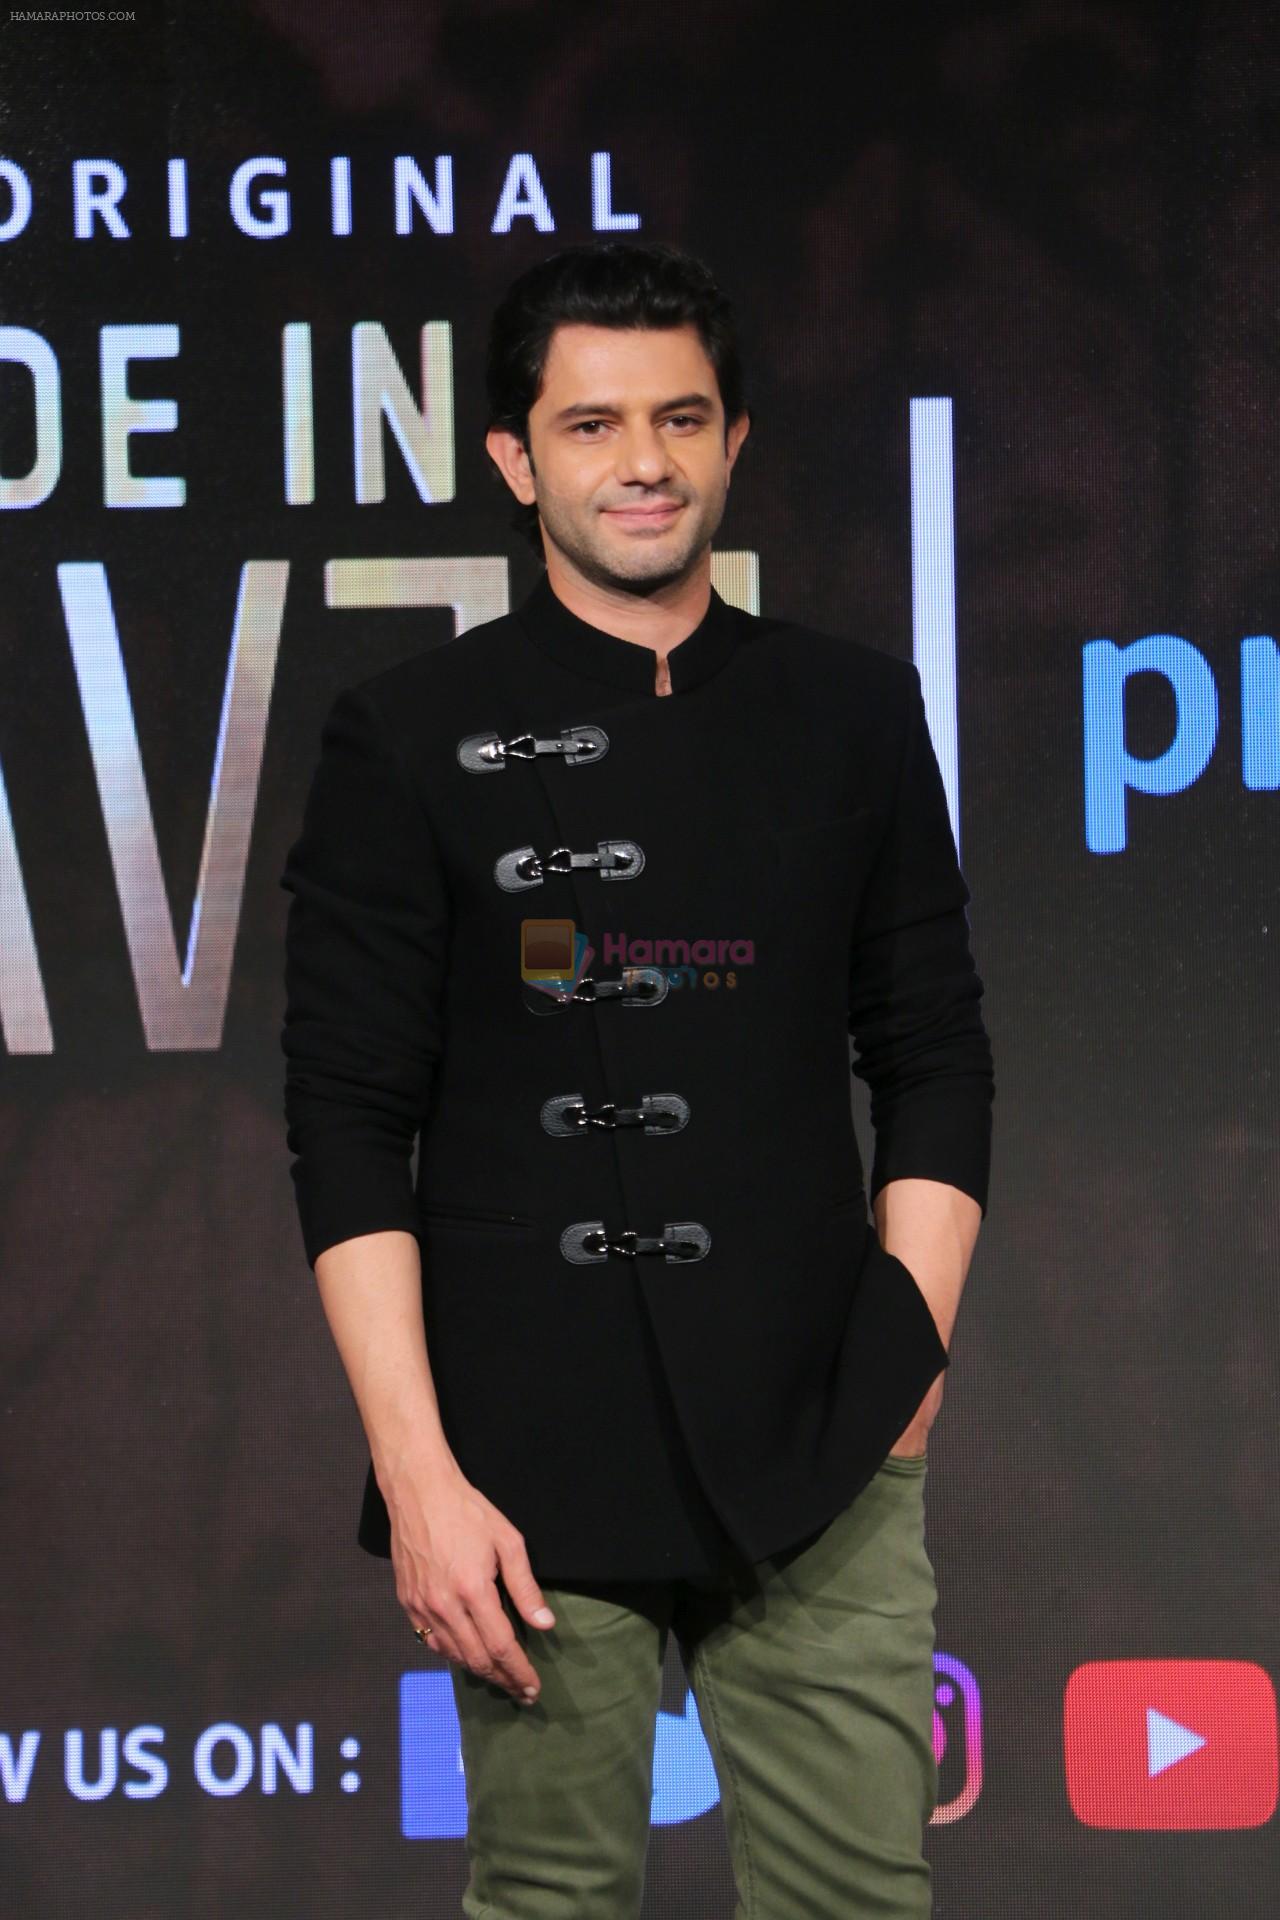 Arjun Mathur at the Launch of Amazon webseries Made in Heaven at jw marriott on 7th March 2019